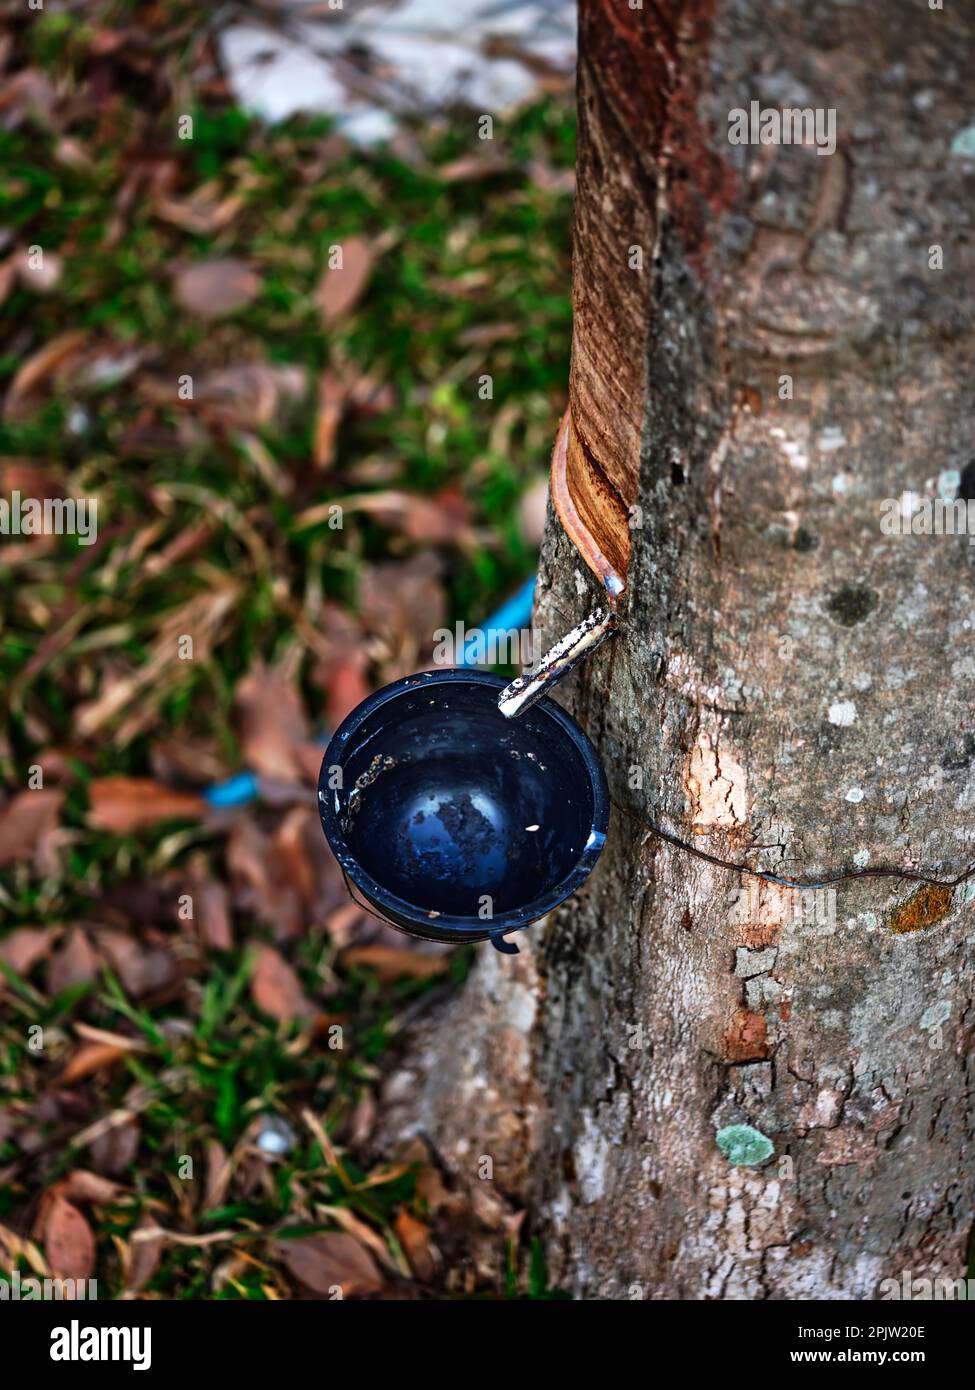 Rubber is harvested in the form of the latex from the rubber tree. Stock Photo